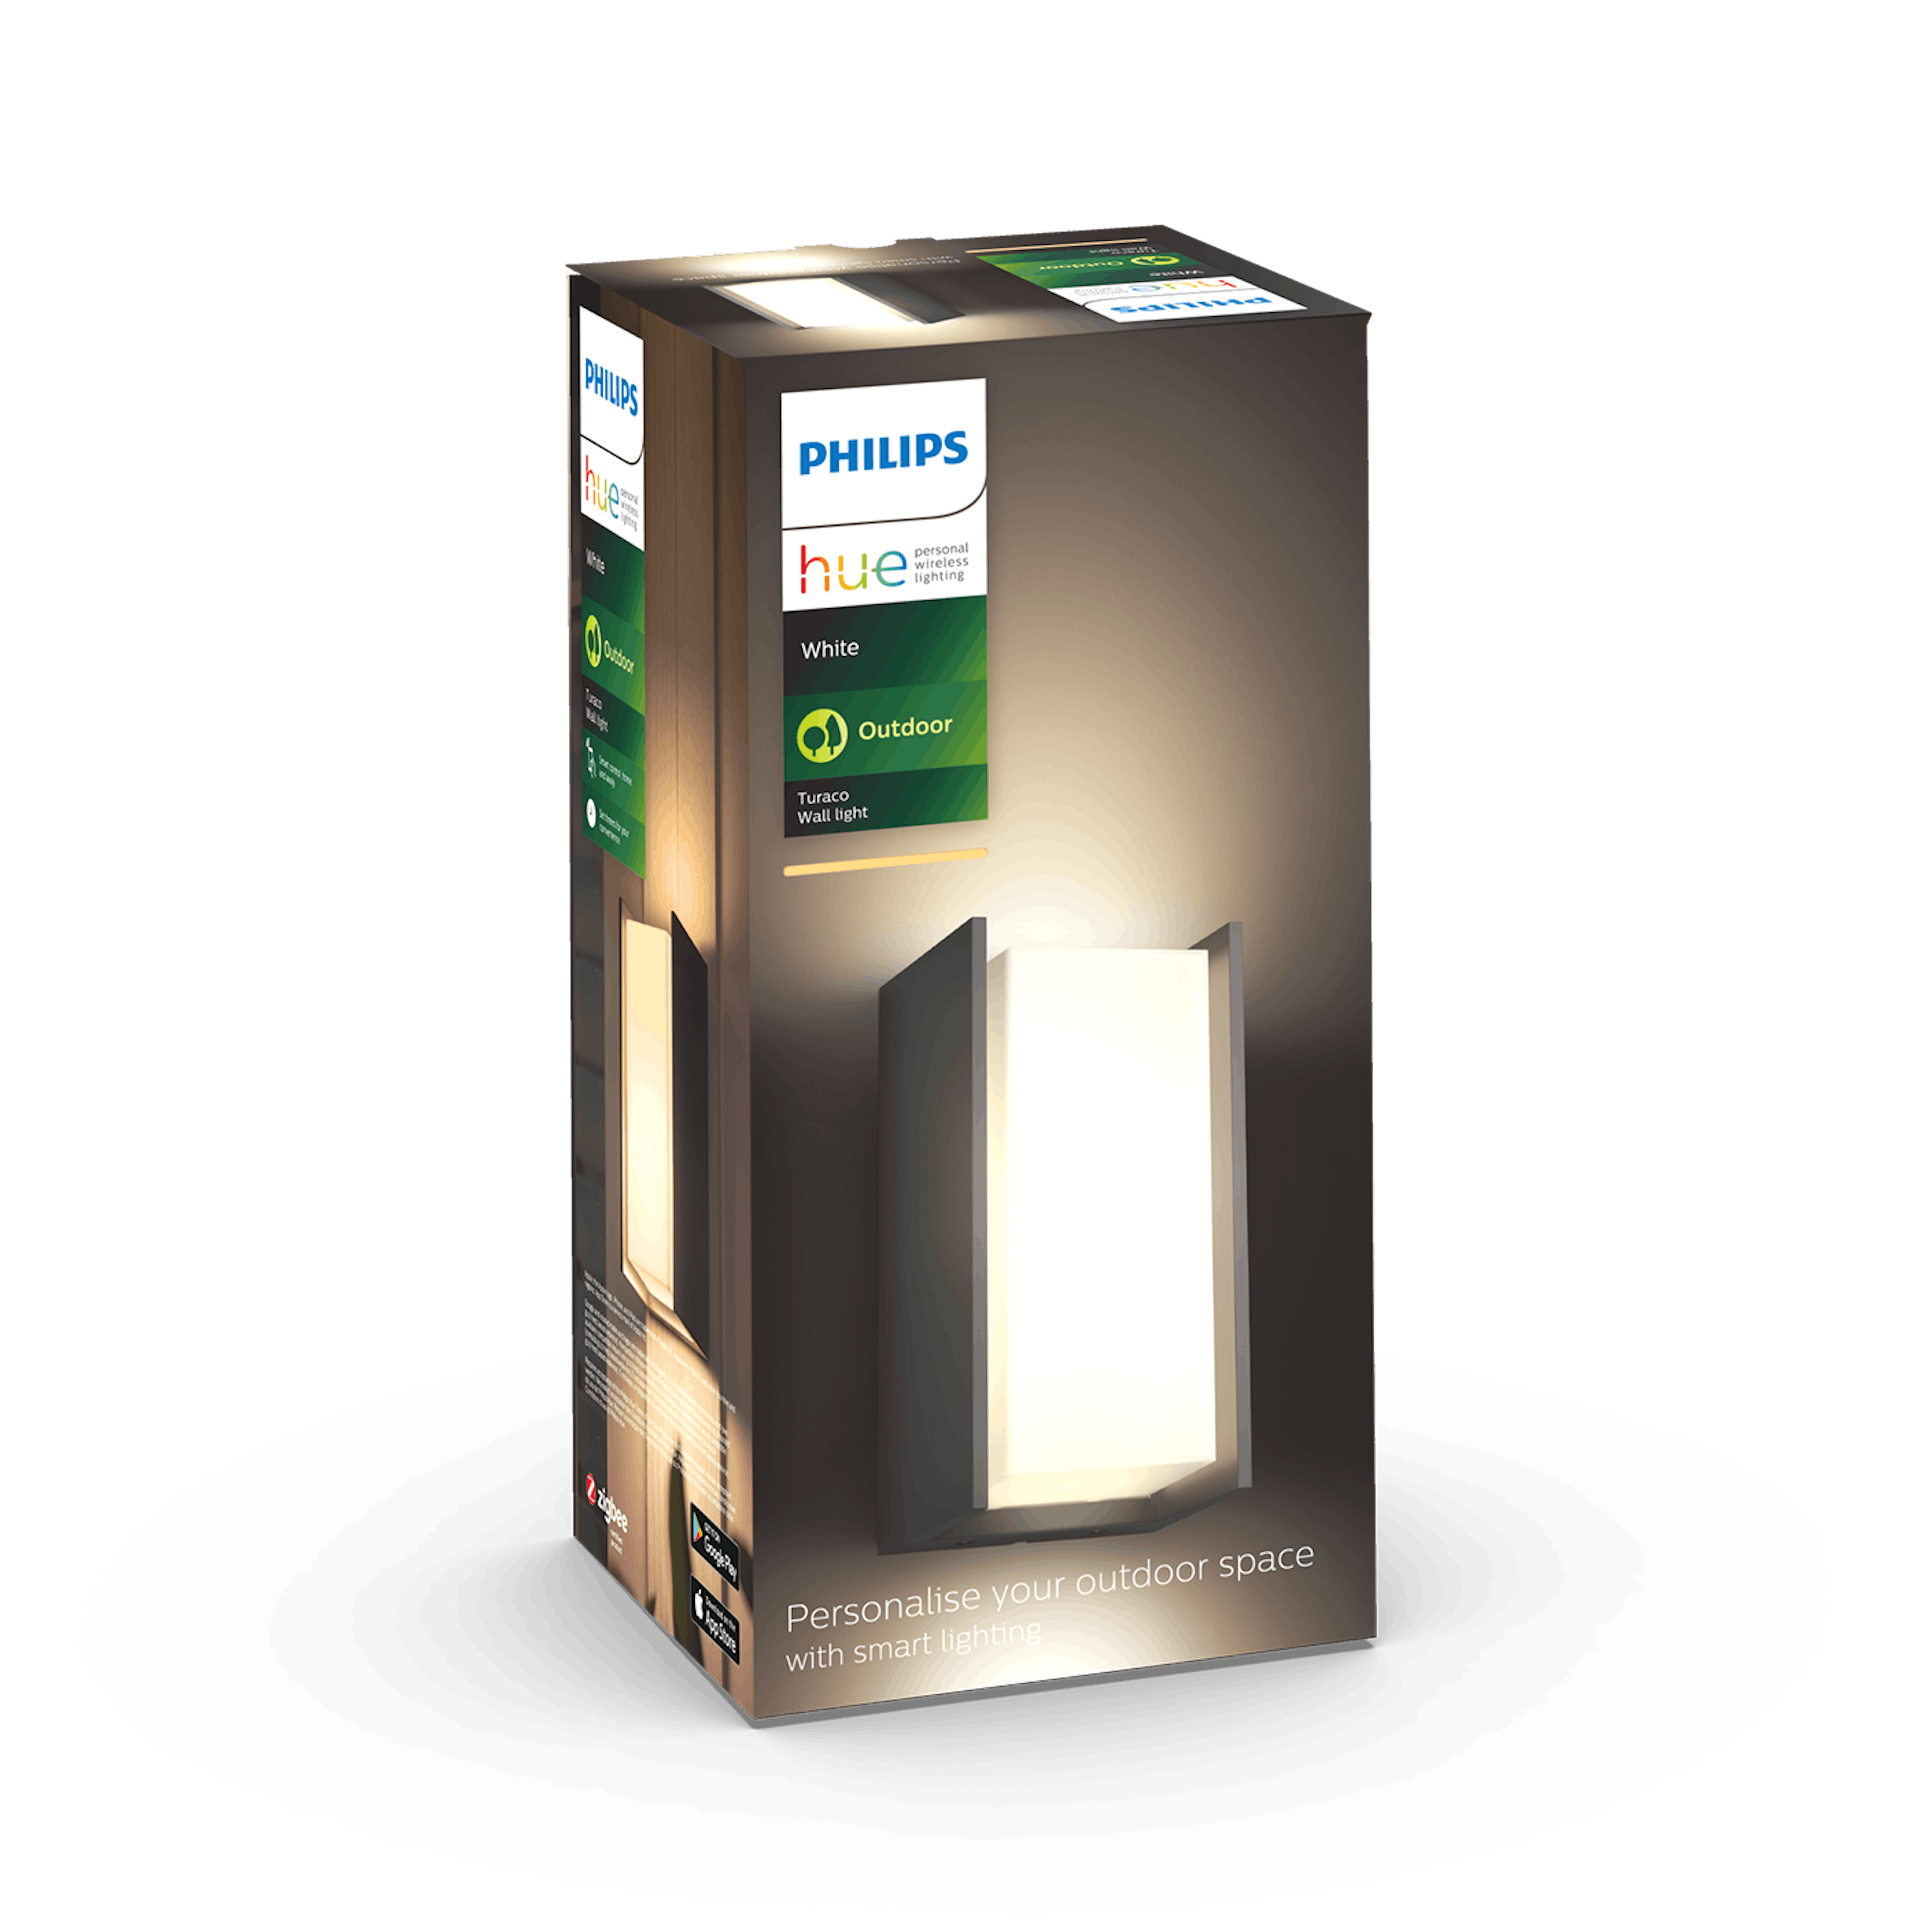 Philips Hue Turaco - Details - Image